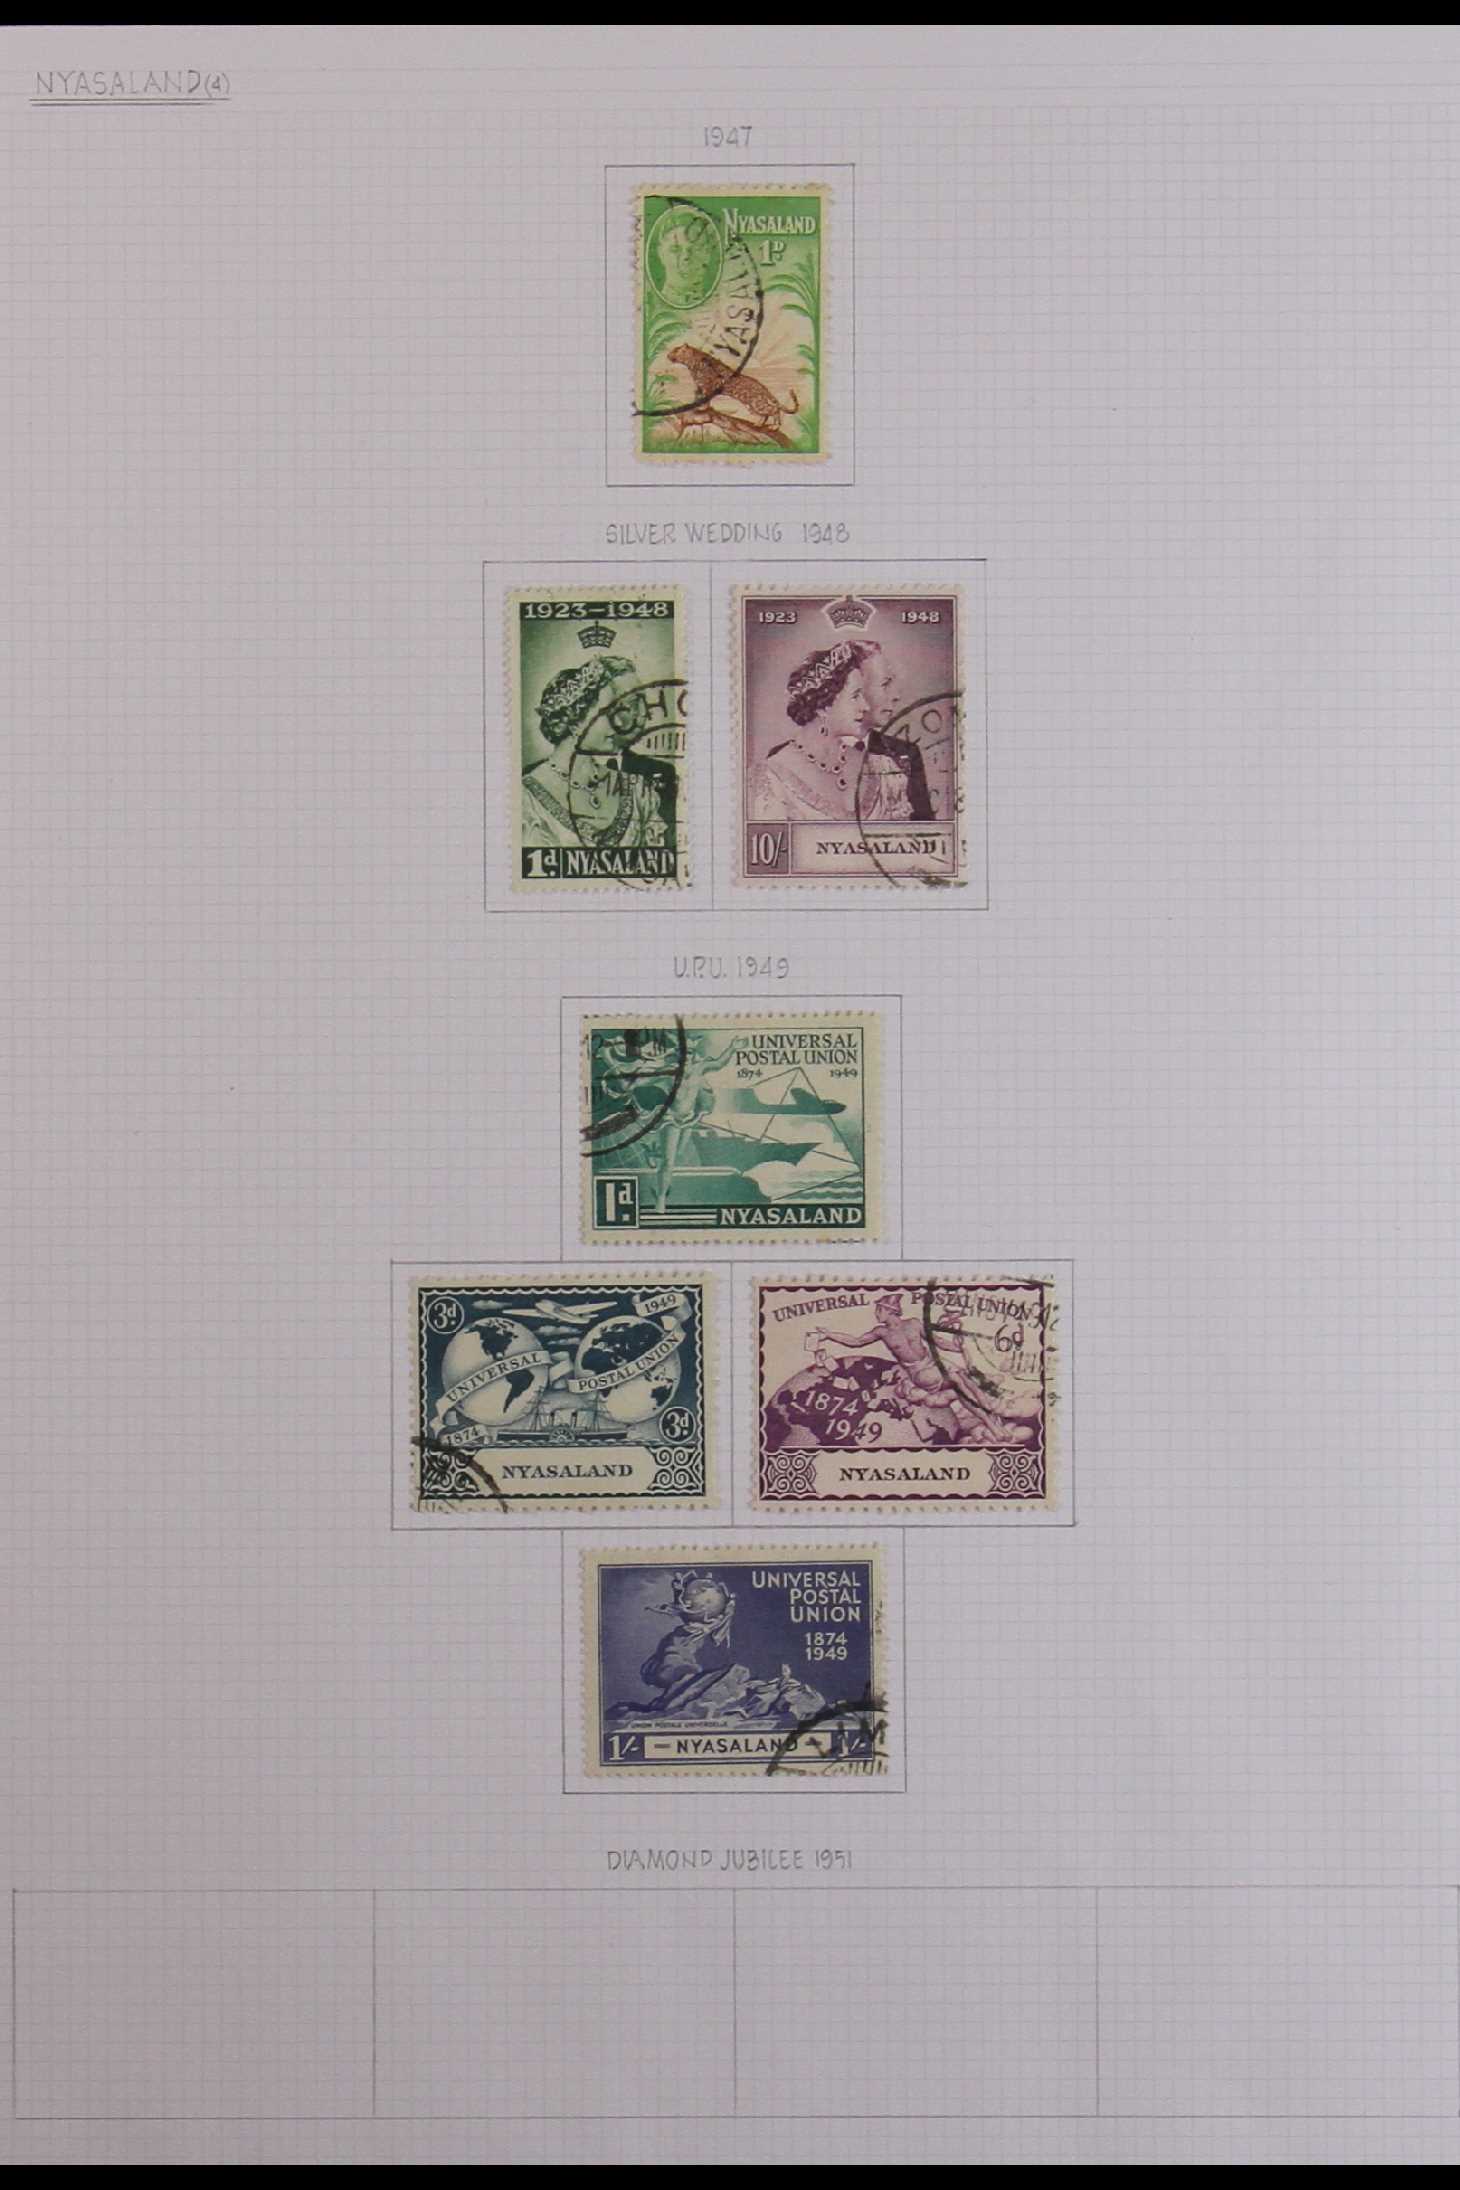 NYASALAND 1934-51 fine used complete basic run from 1934-35 KGV definitive set to 1951 Diamond - Image 4 of 5